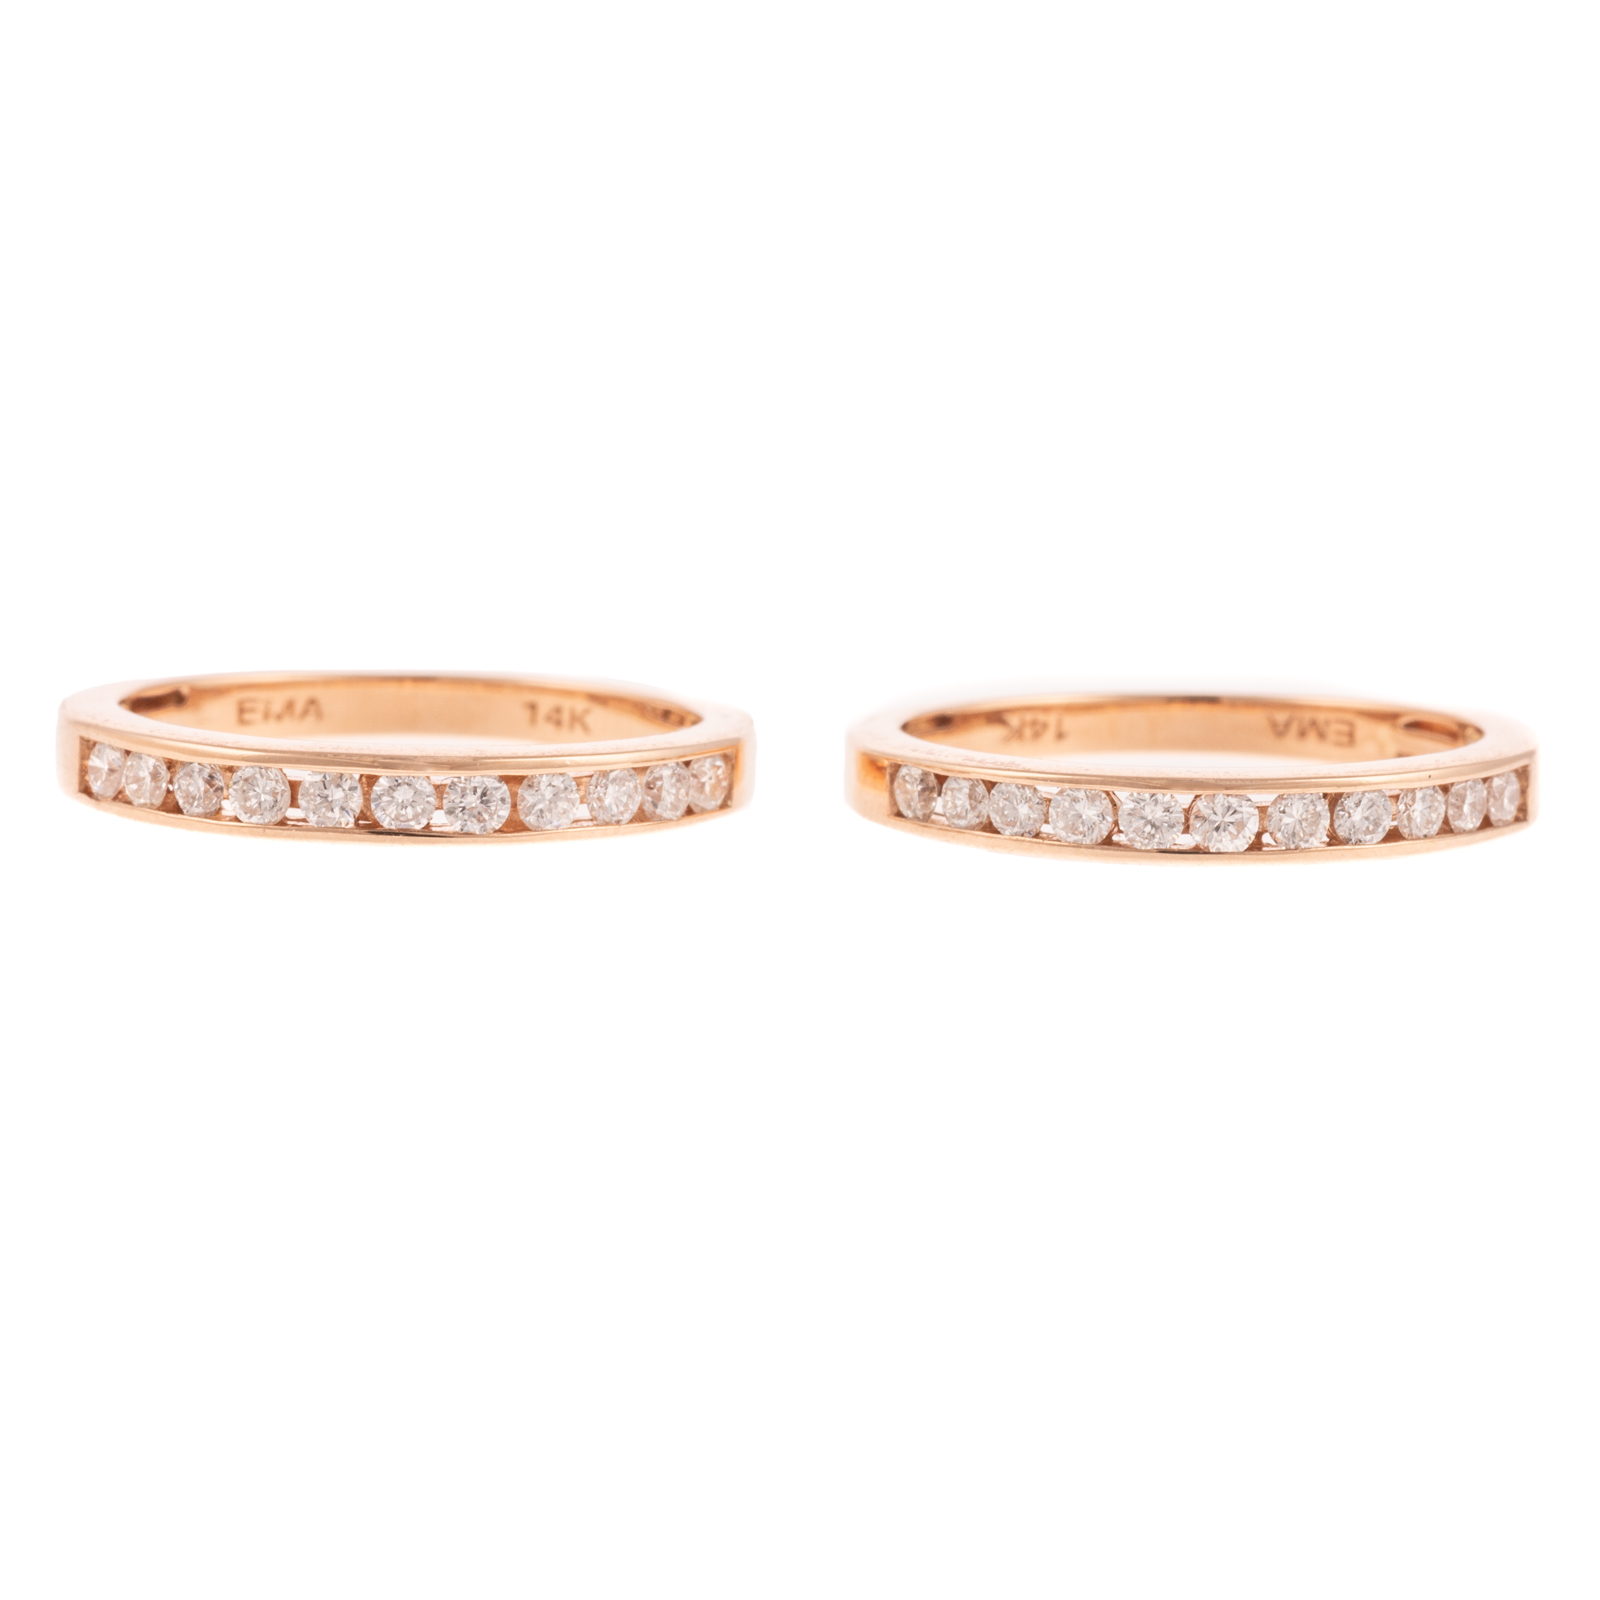 A PAIR OF CHANNEL SET DIAMOND BANDS